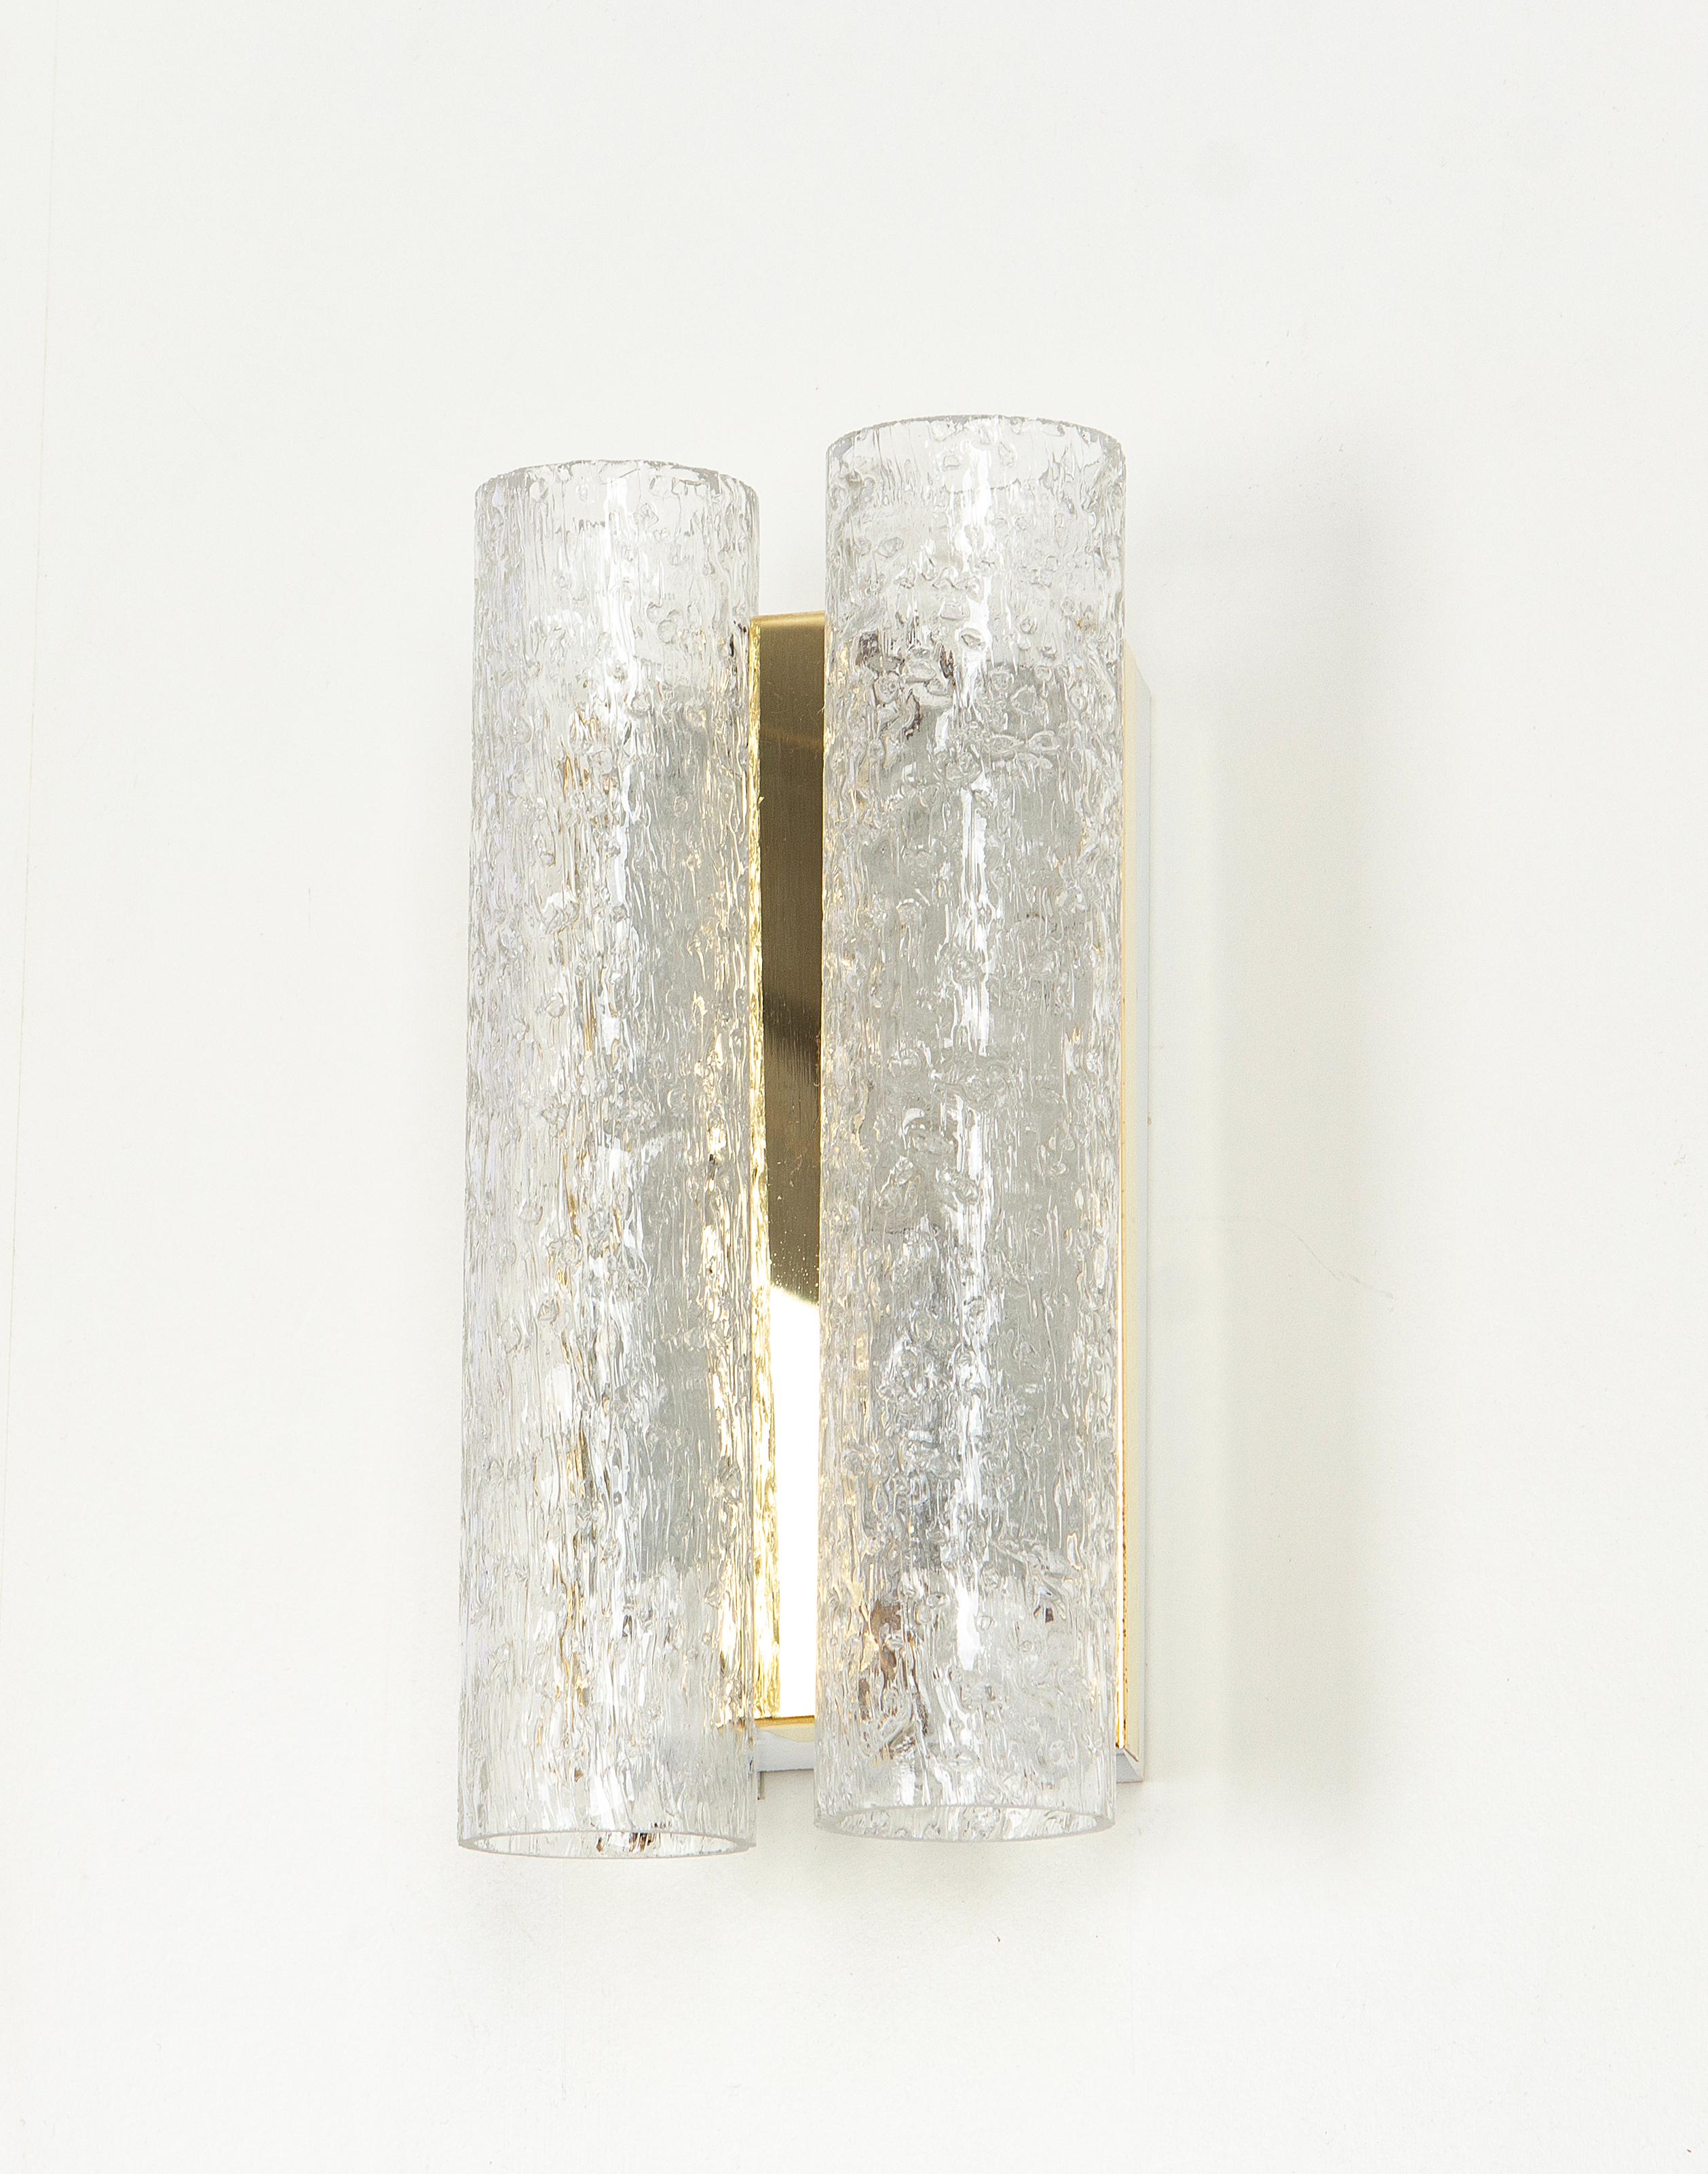 Wonderful pair of midcentury wall sconces with ice glass tubes, made by Doria Leuchten, Germany, manufactured, circa 1960-1969.

High quality and in very good condition. Cleaned, well-wired and ready to use. 

Each sconce requires 1 x E14 Small